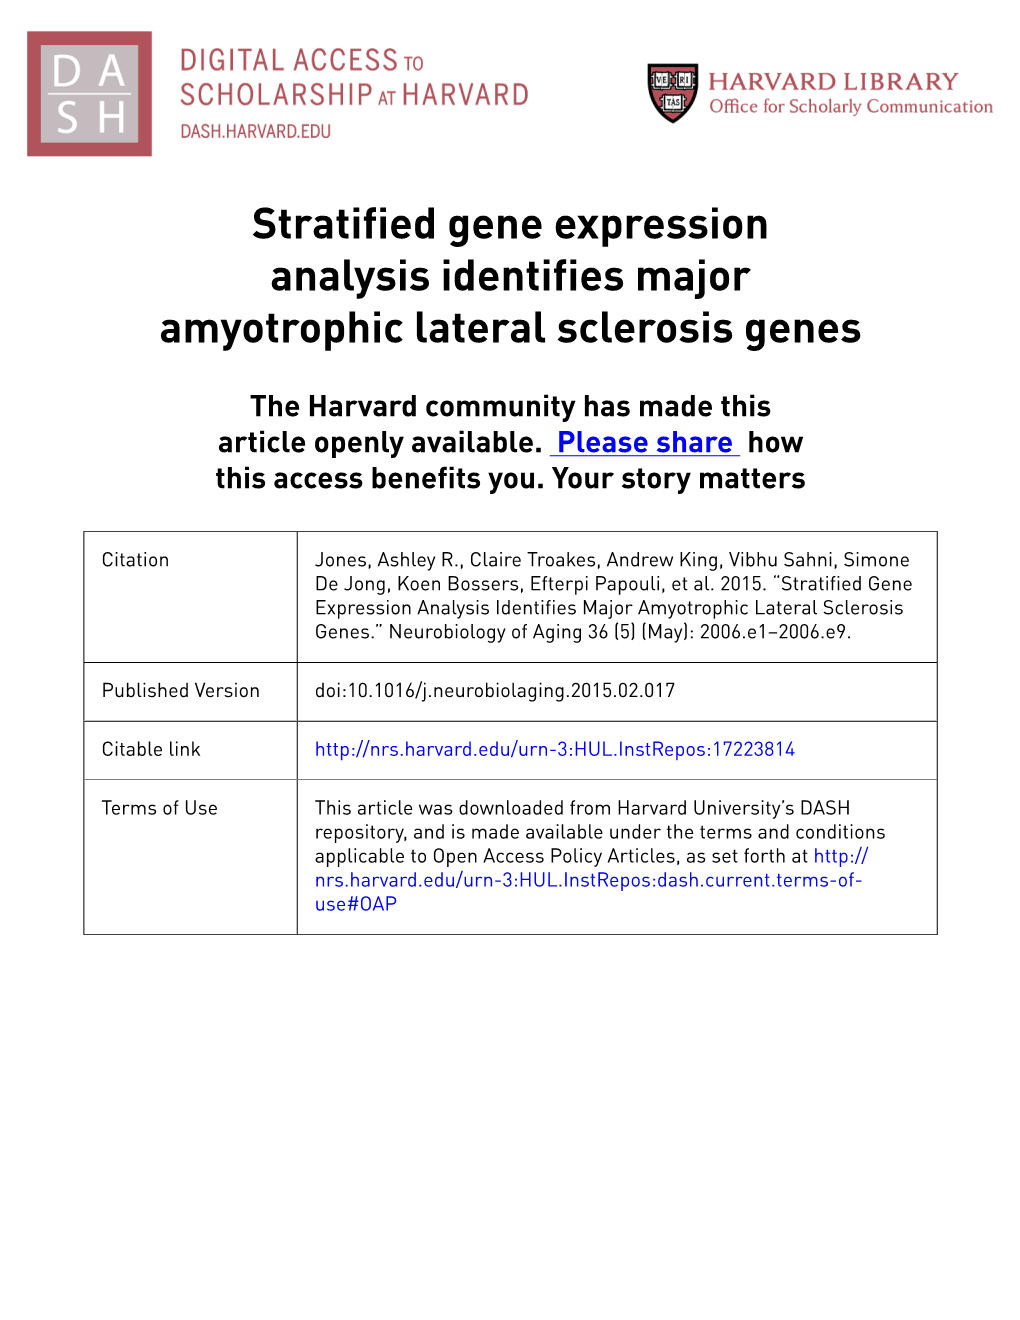 Stratified Gene Expression Analysis Identifies Major Amyotrophic Lateral Sclerosis Genes